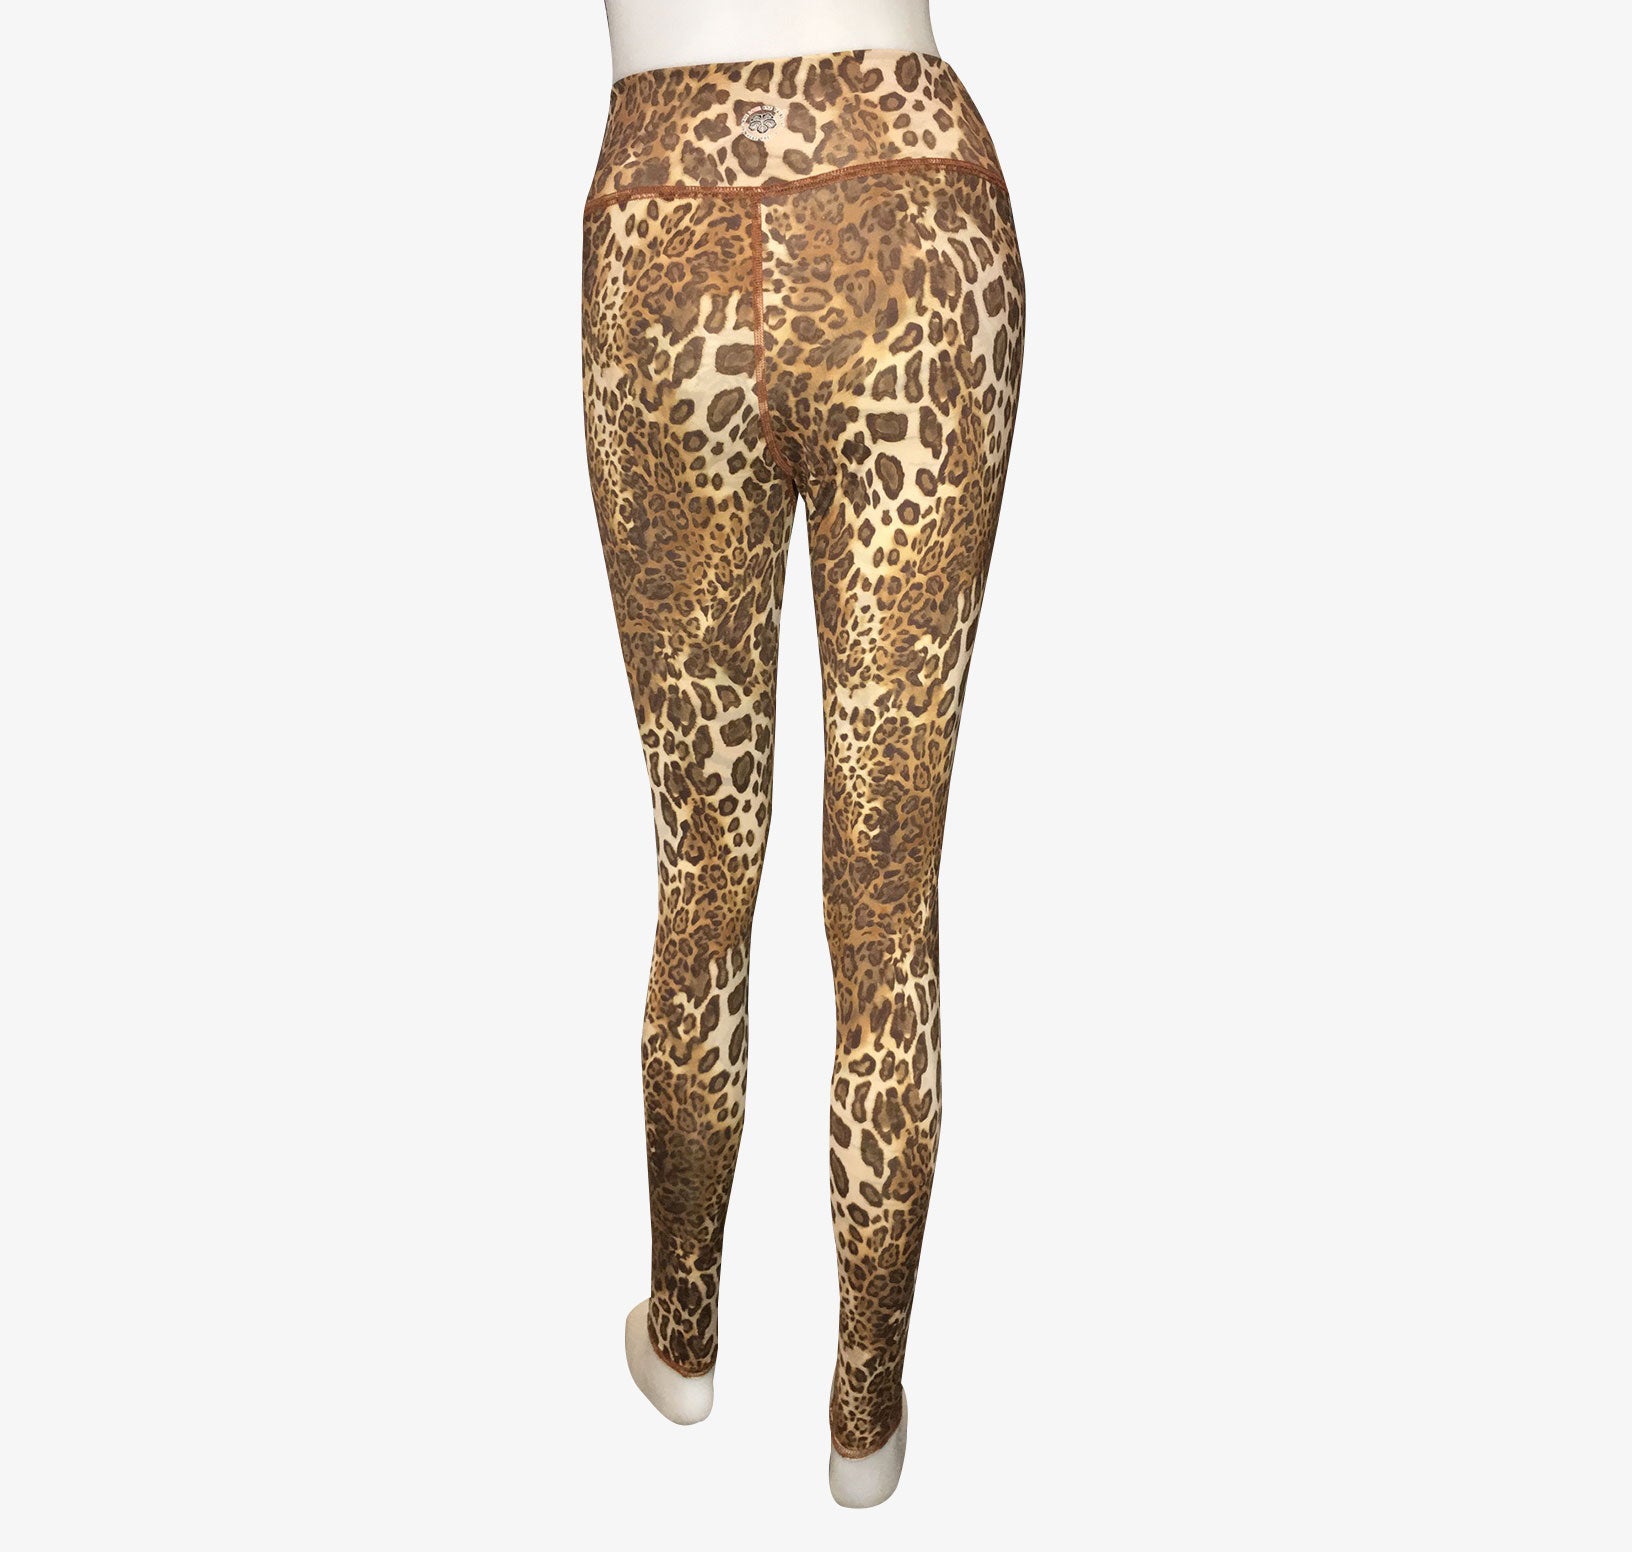 LEGGINGS BROWN TIGER/LEOPARD – One Love One Tribe Apparel